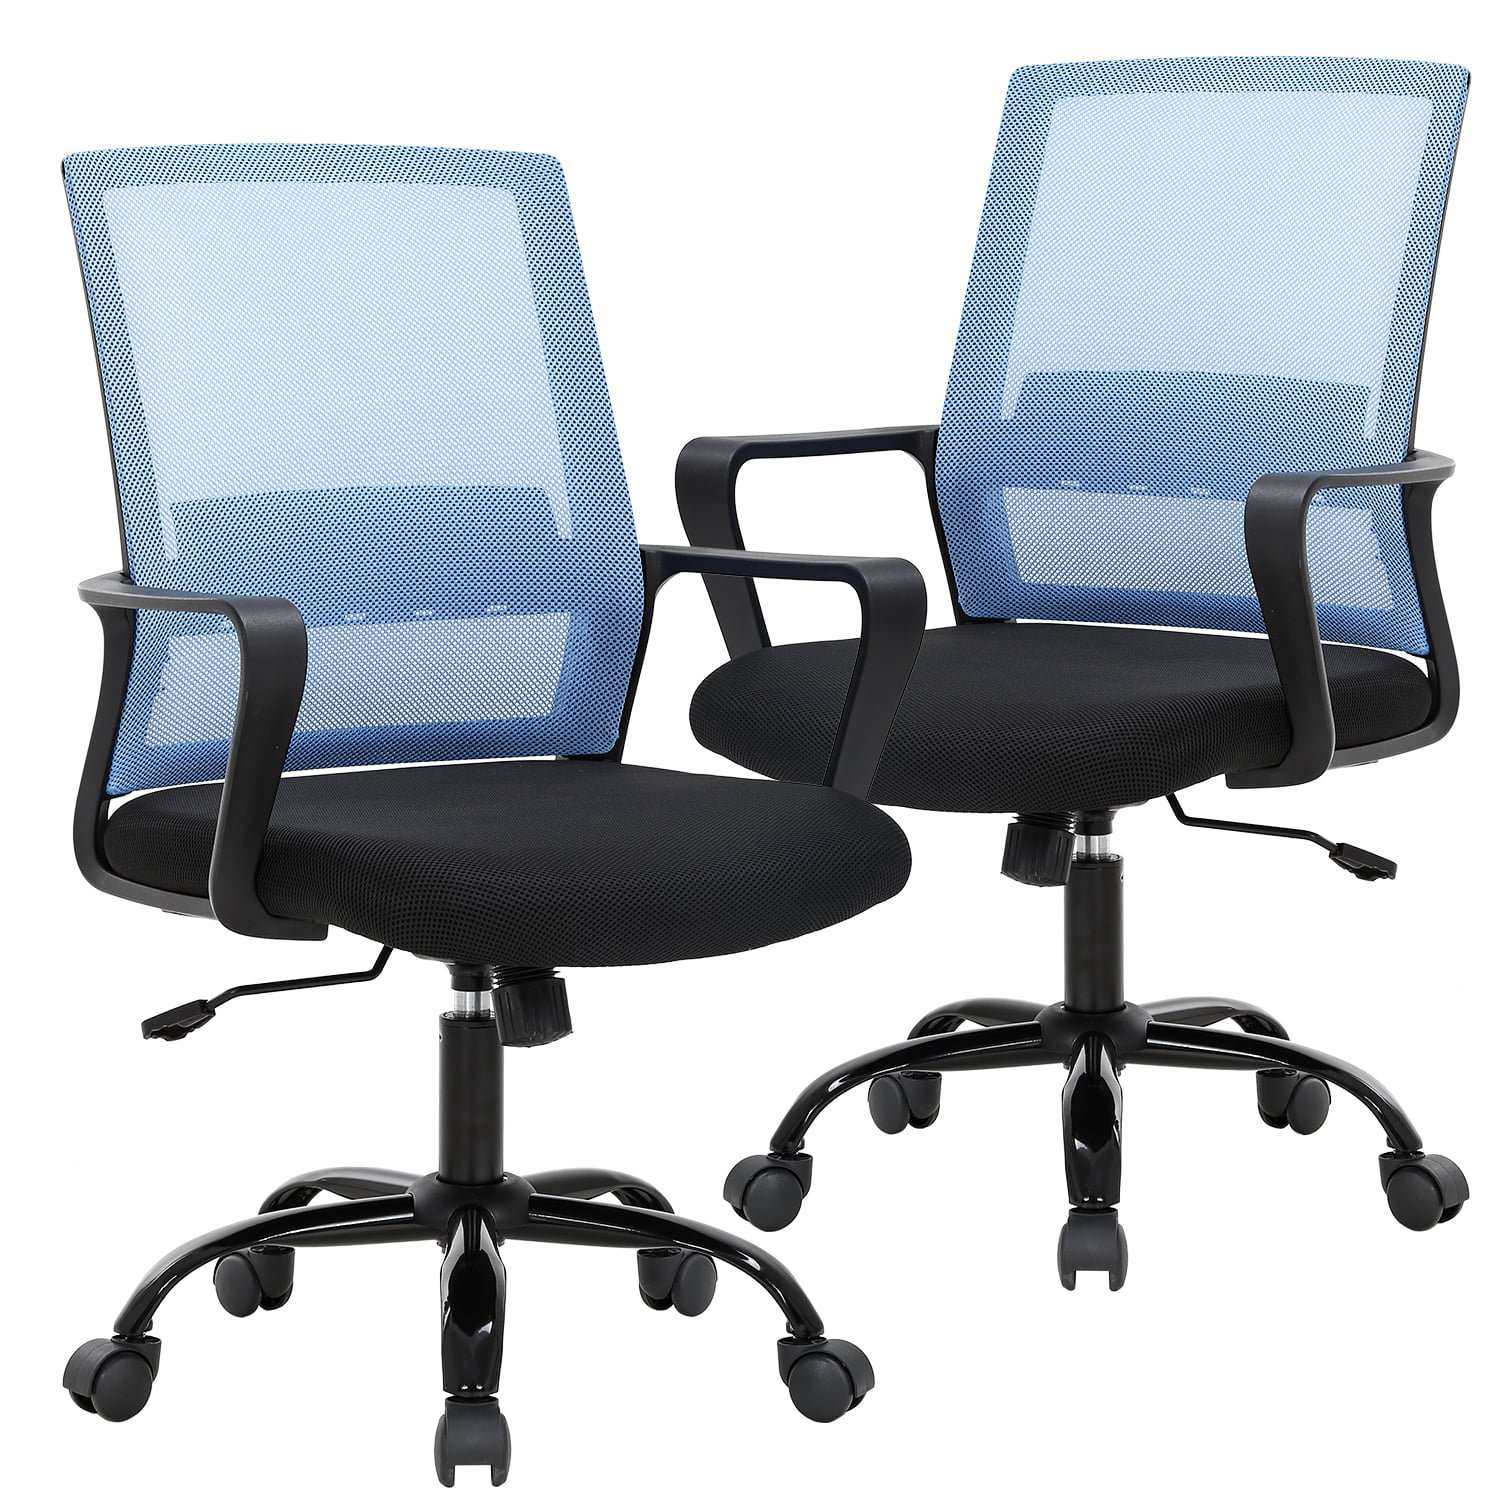 ergonomic Best Desk Chair For Posture Affordable with Dual Monitor